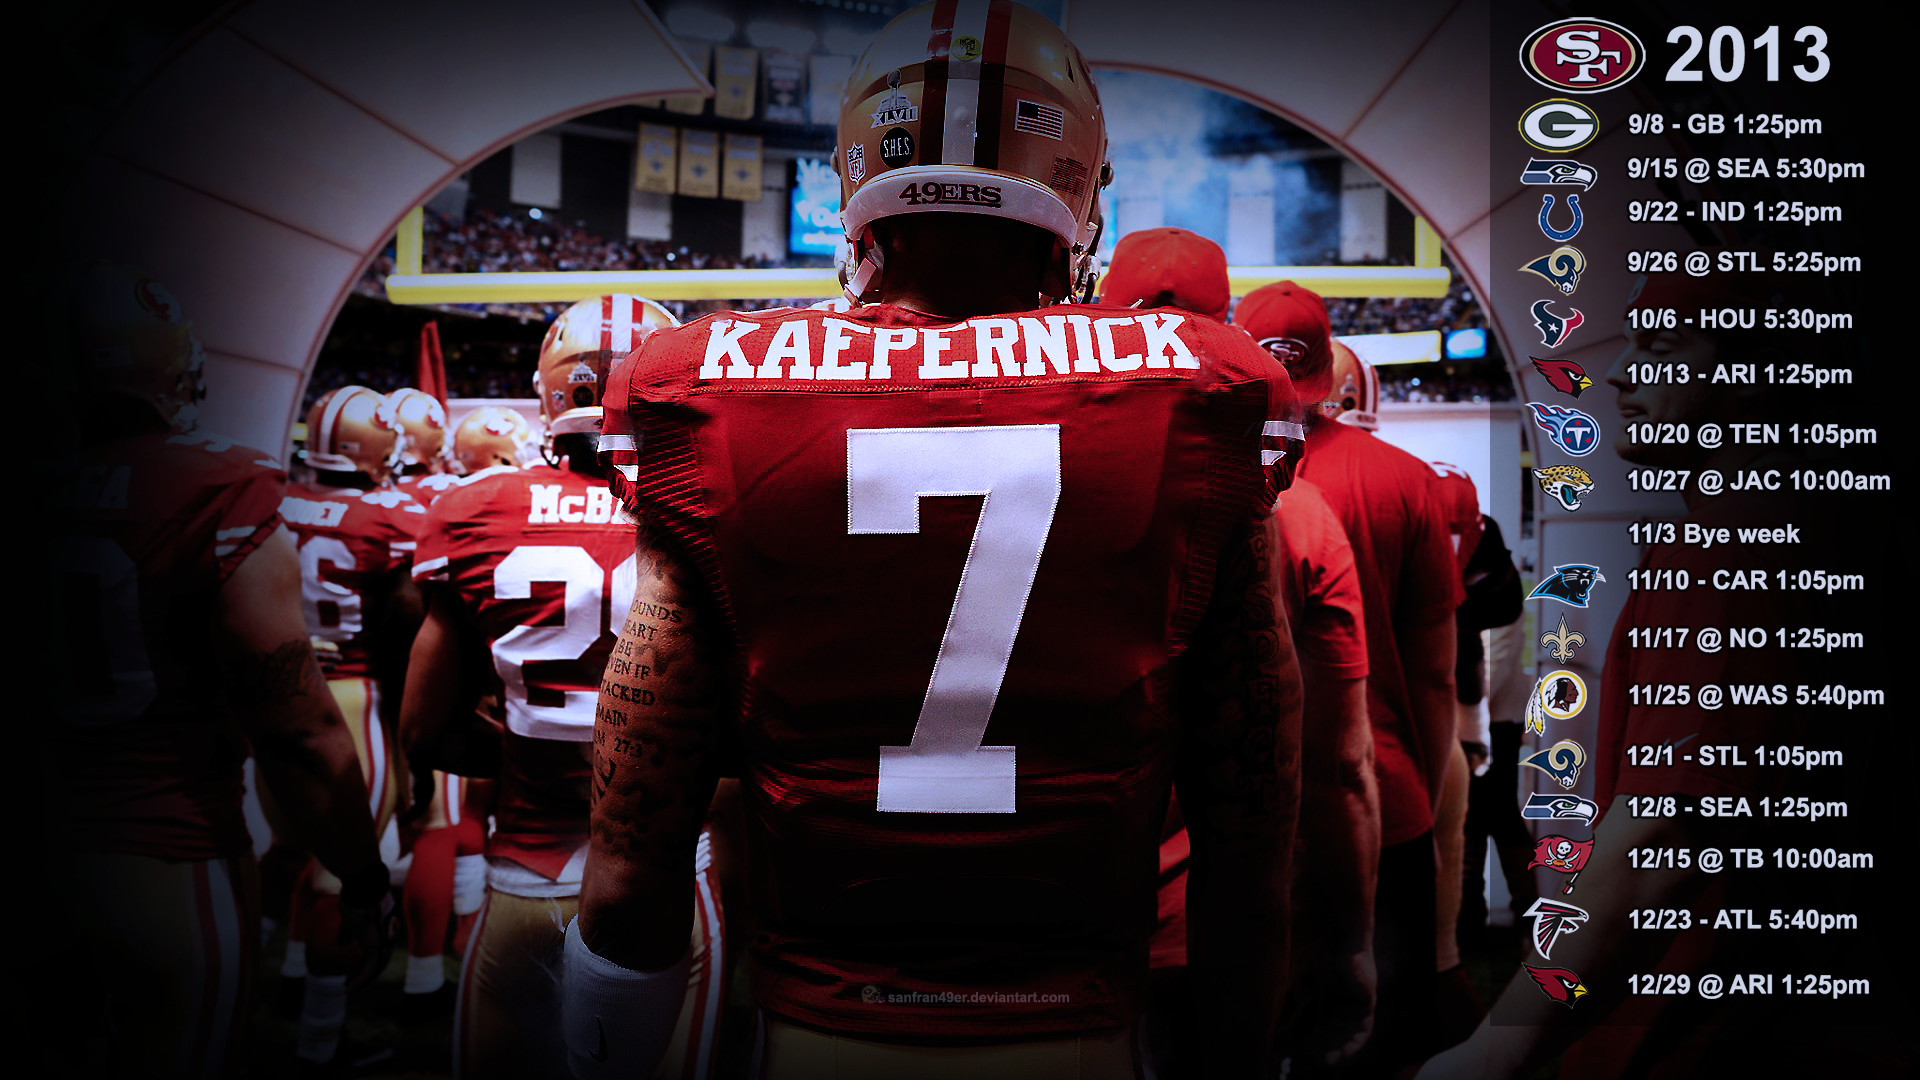 1920x1080 ... Kaepernick Wallpaper with 2013 schedule (PST) by SanFran49er